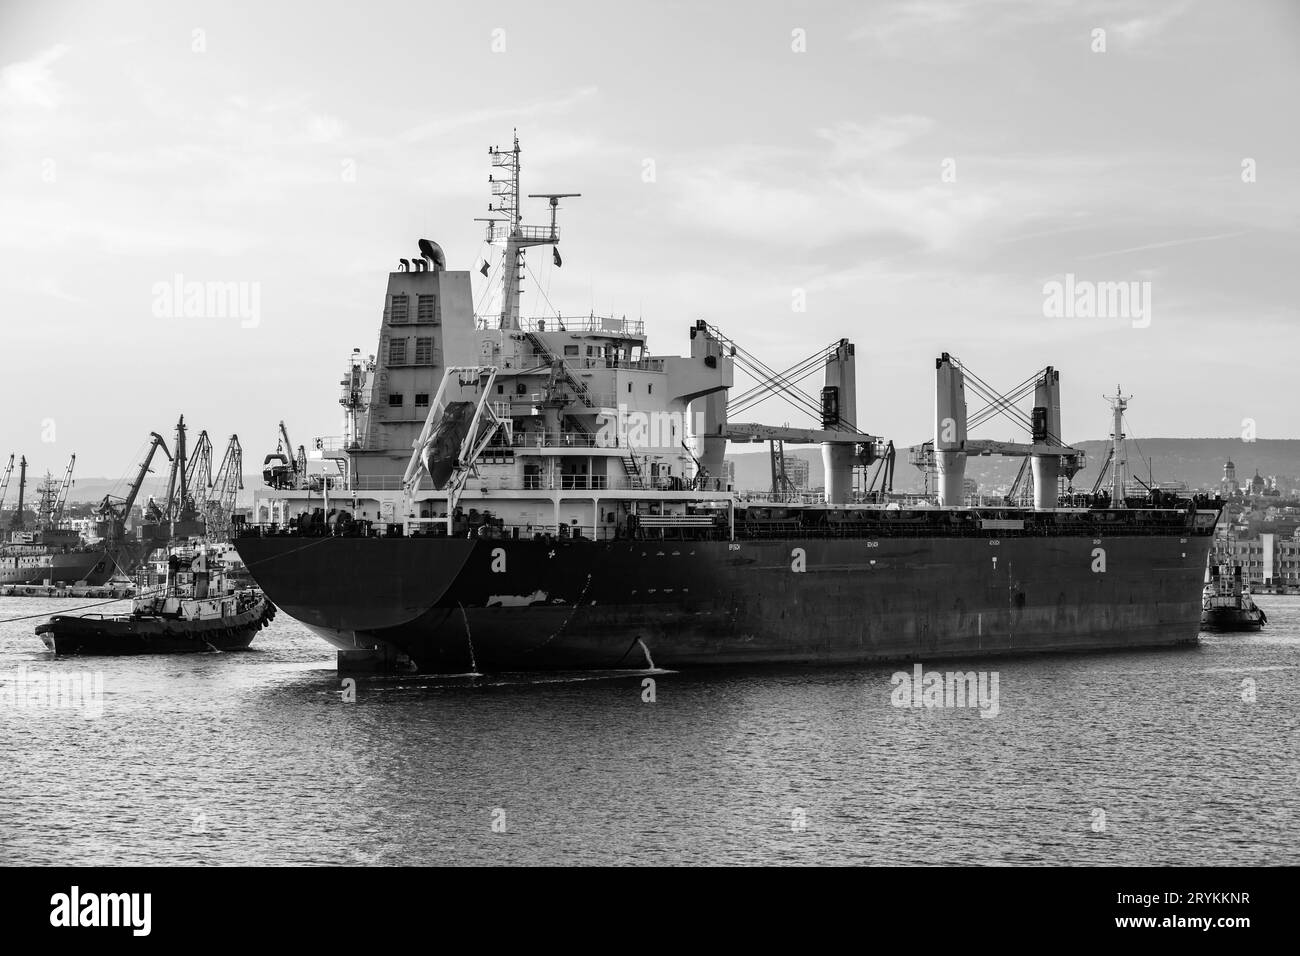 Bulk carrier and a tug boat enters in port of Varna, Bulgaria. Black and white photo Stock Photo